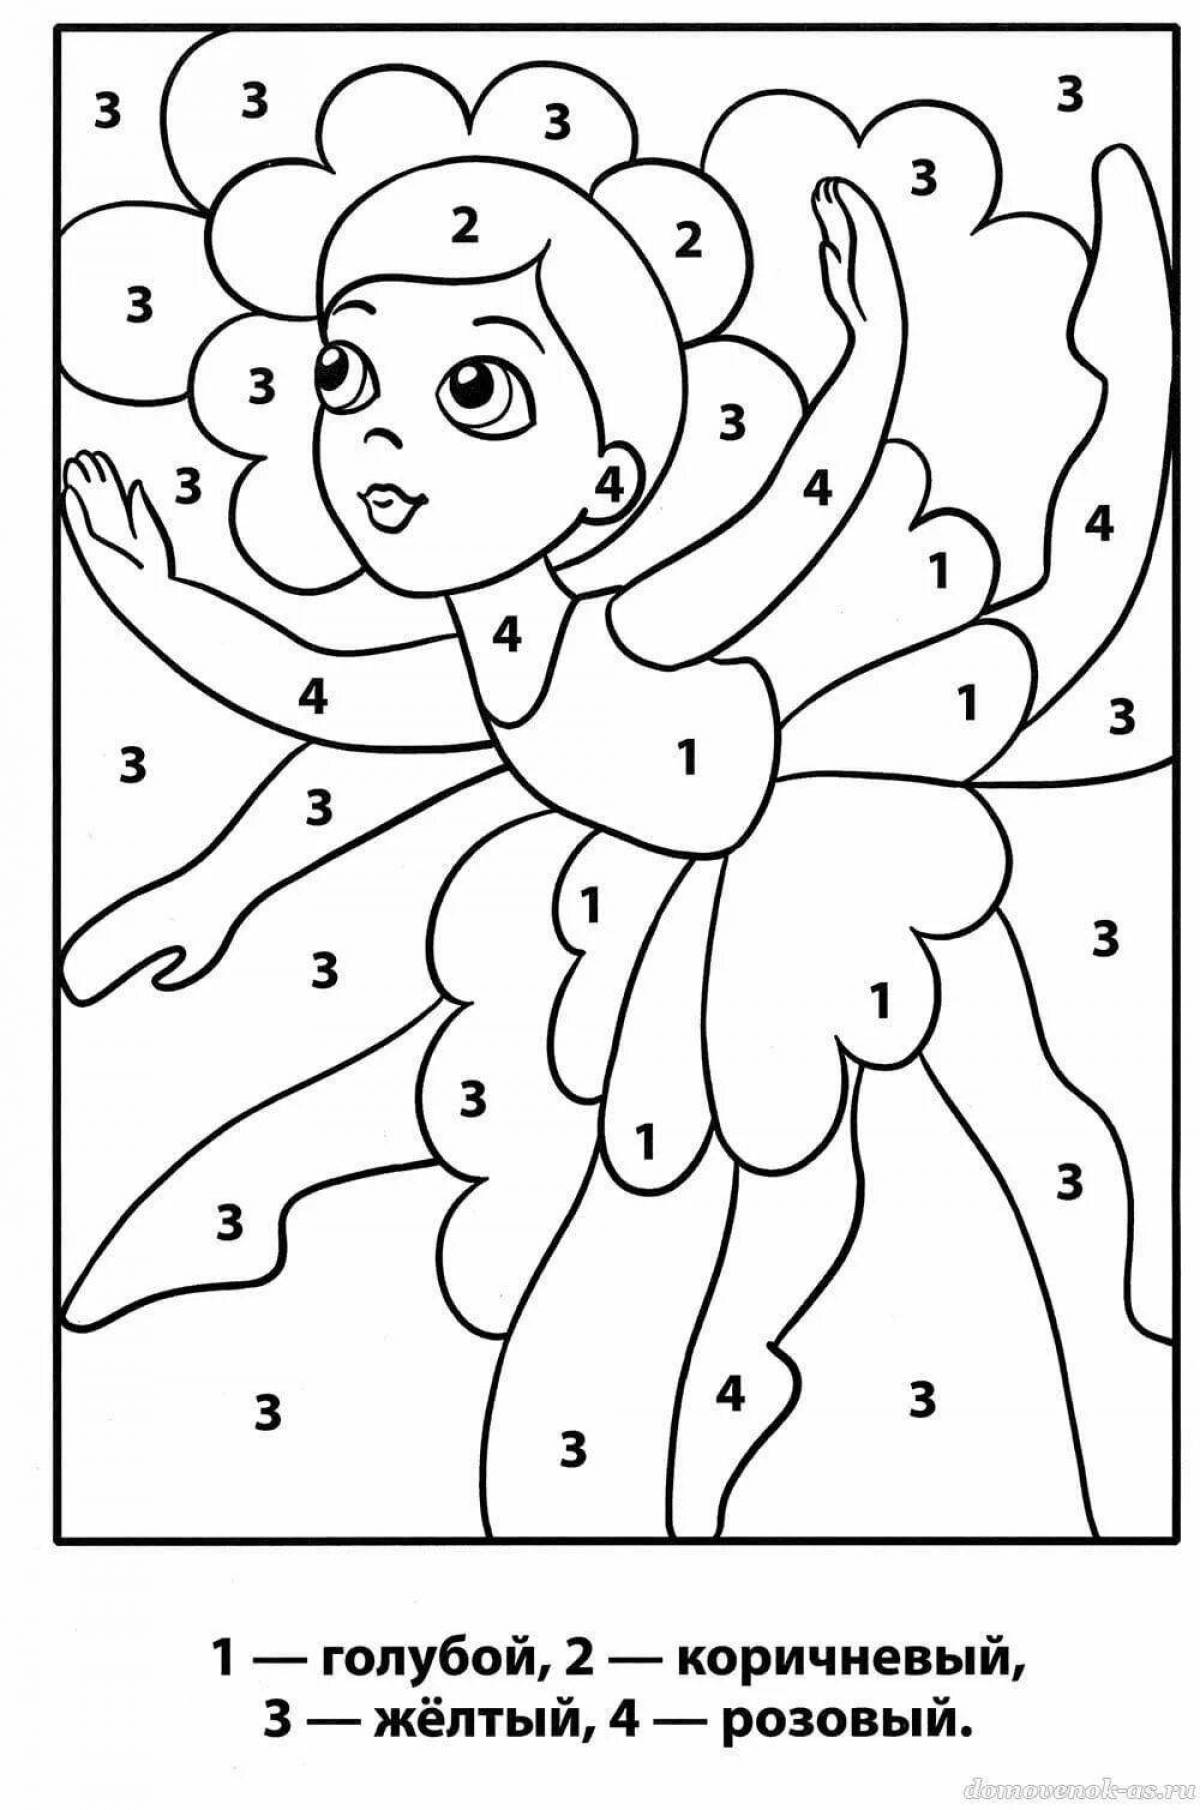 Joyful coloring by numbers for kids 5 6